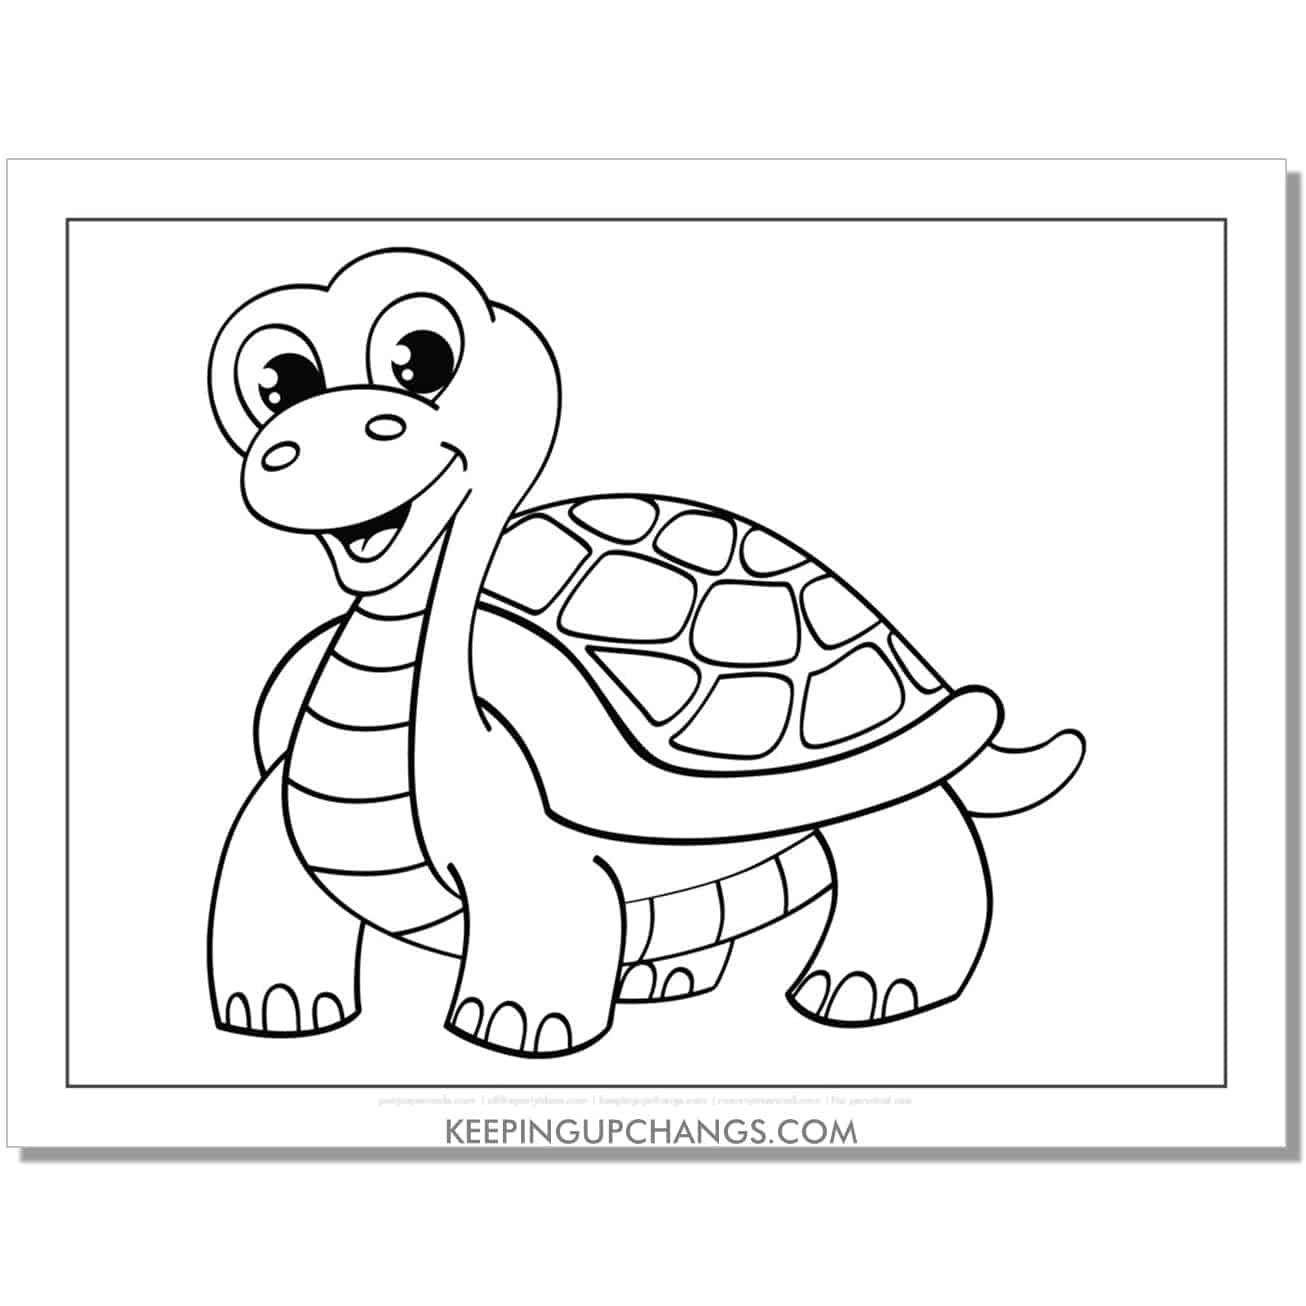 free friendly turtle coloring page, sheet for preschool, toddlers.